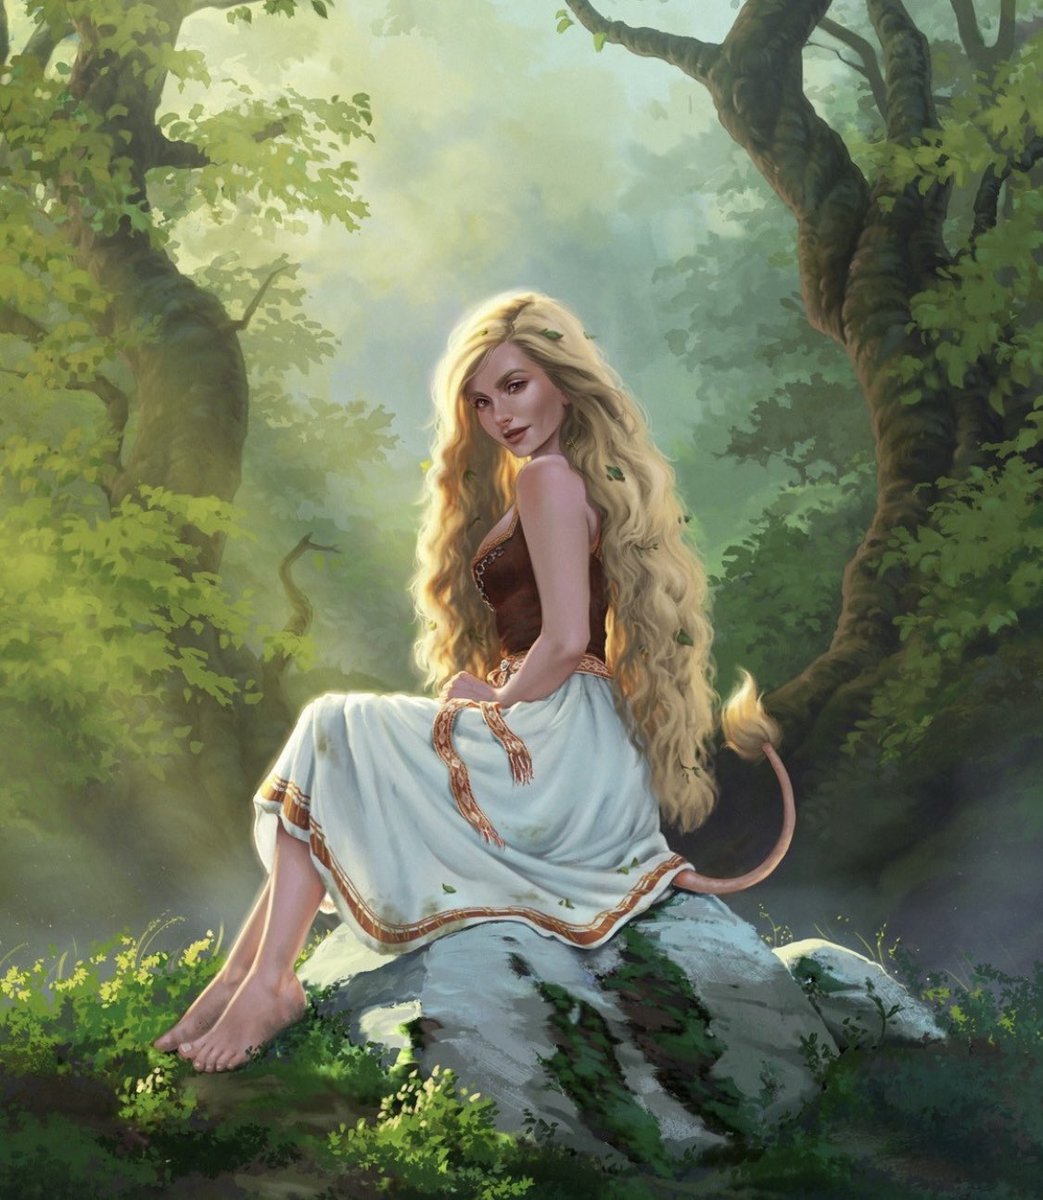 Huldra is a seductive forest nymph in Norwegian folklore, that is known to lure men into her underground realm. Life with the hulders is filled with sensual pleasures, but in order to stay he has to give up his soul, making it impossible to ever leave.

Art by Wictoria Nordgård